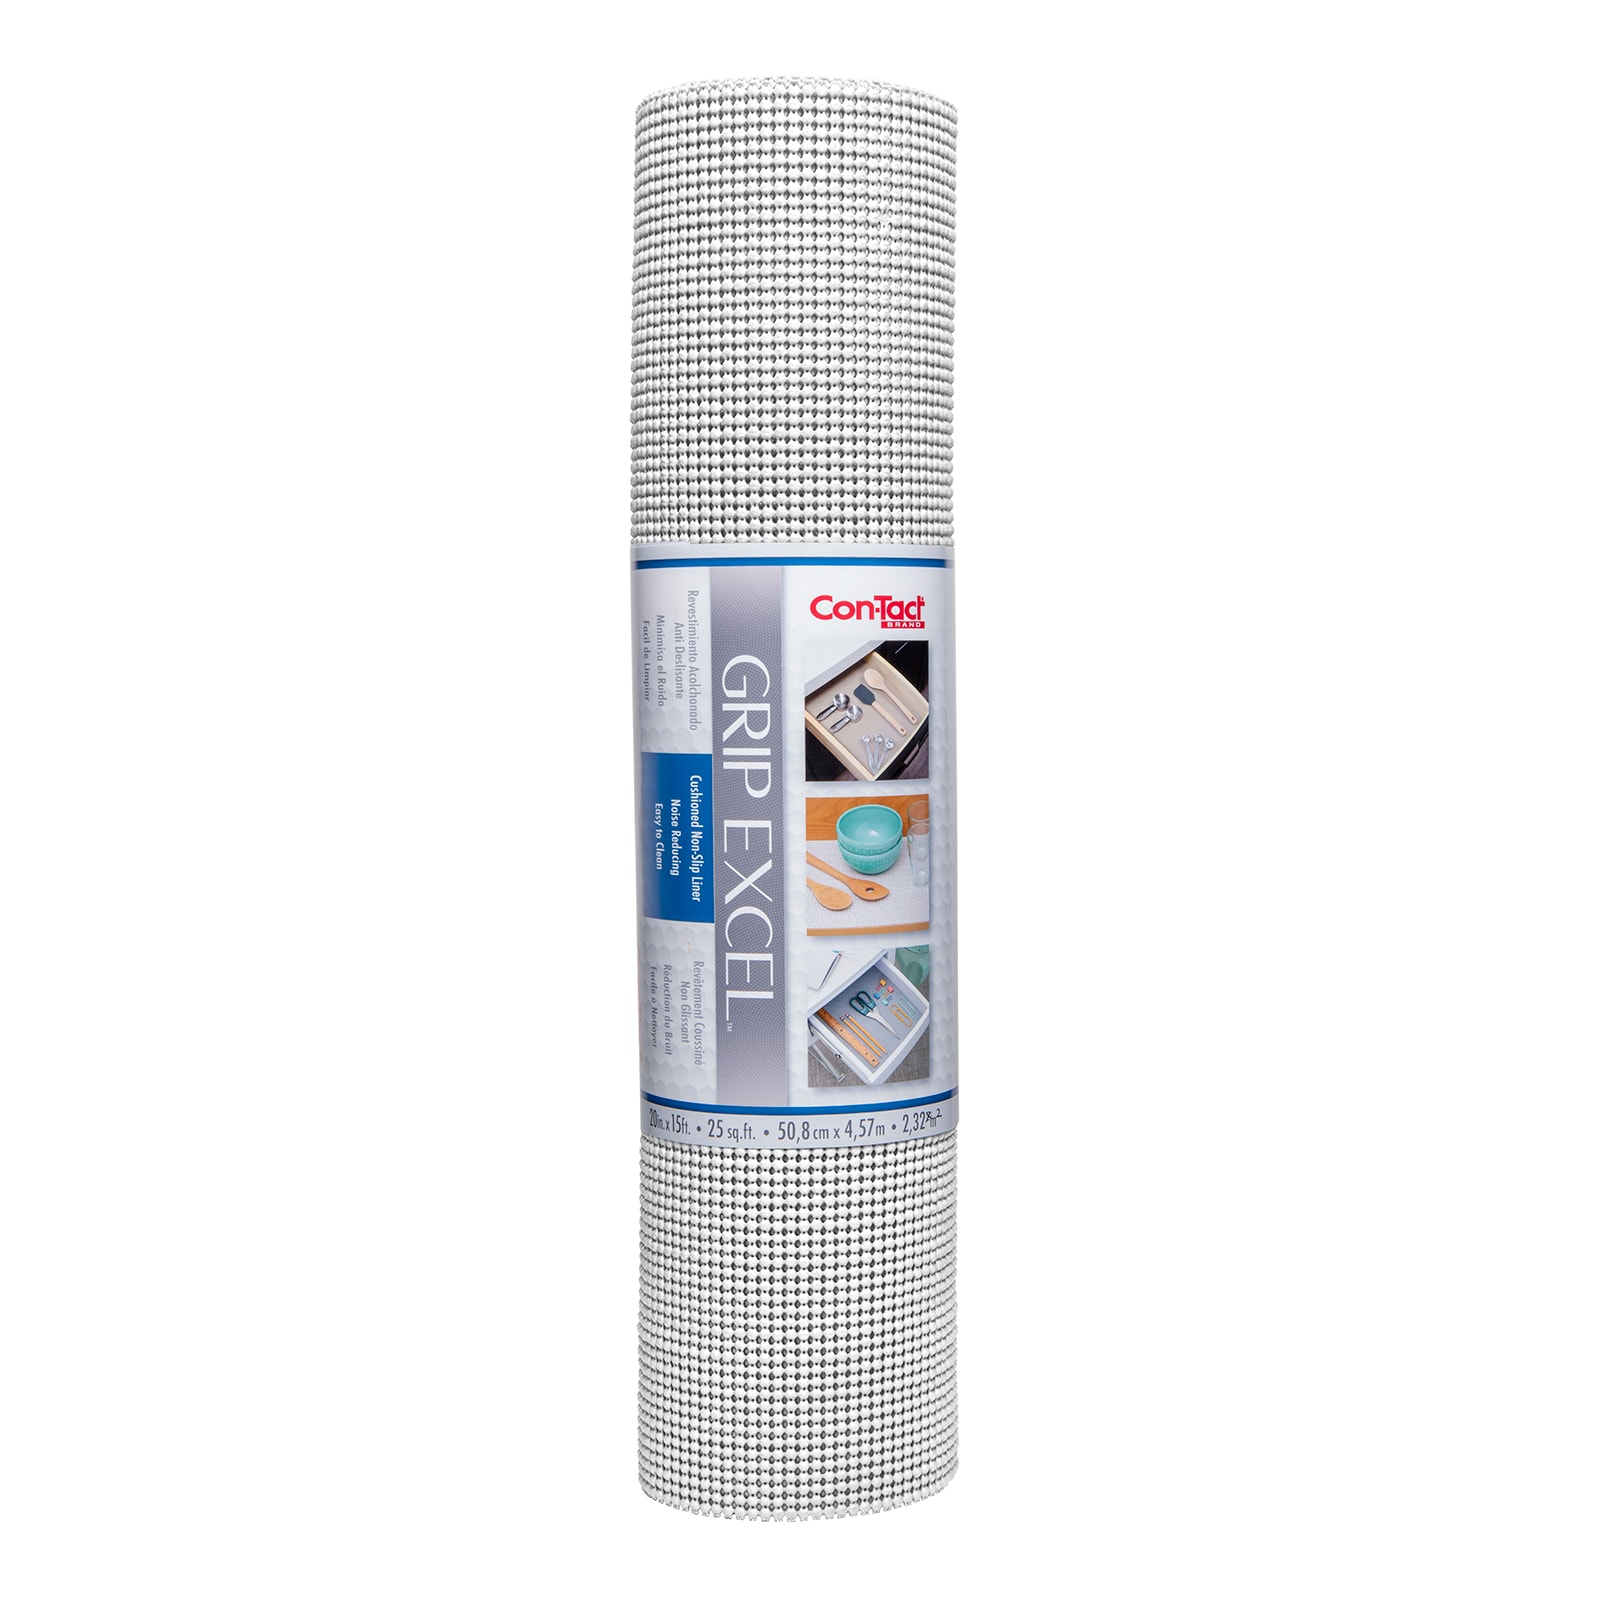 Grip Liners White Non-Slip Shelf Liner, Sold by at Home